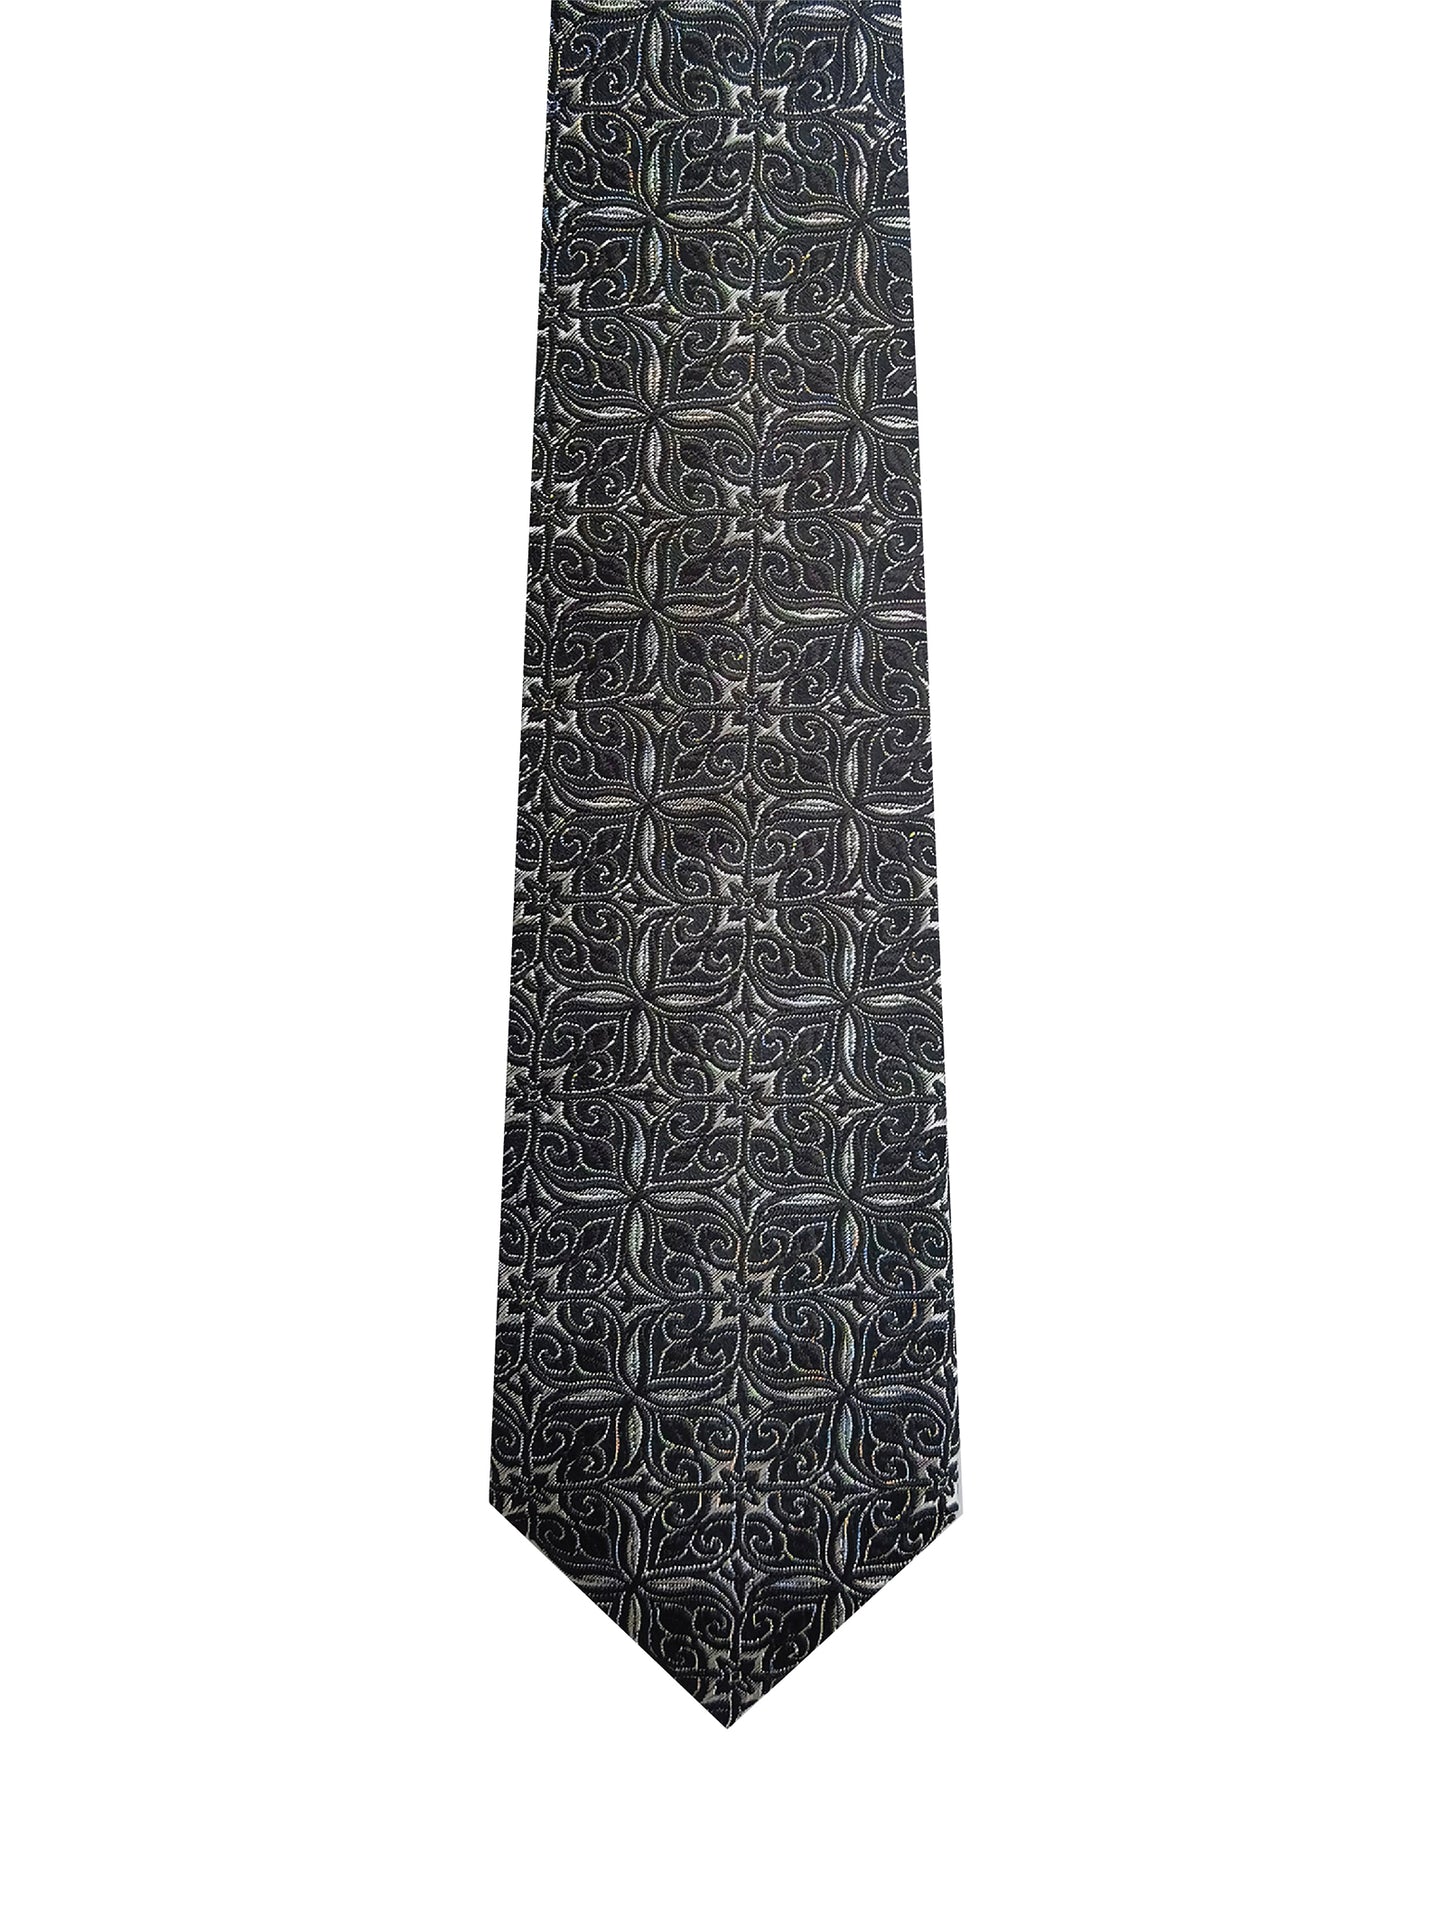 THE FDL BW TIE